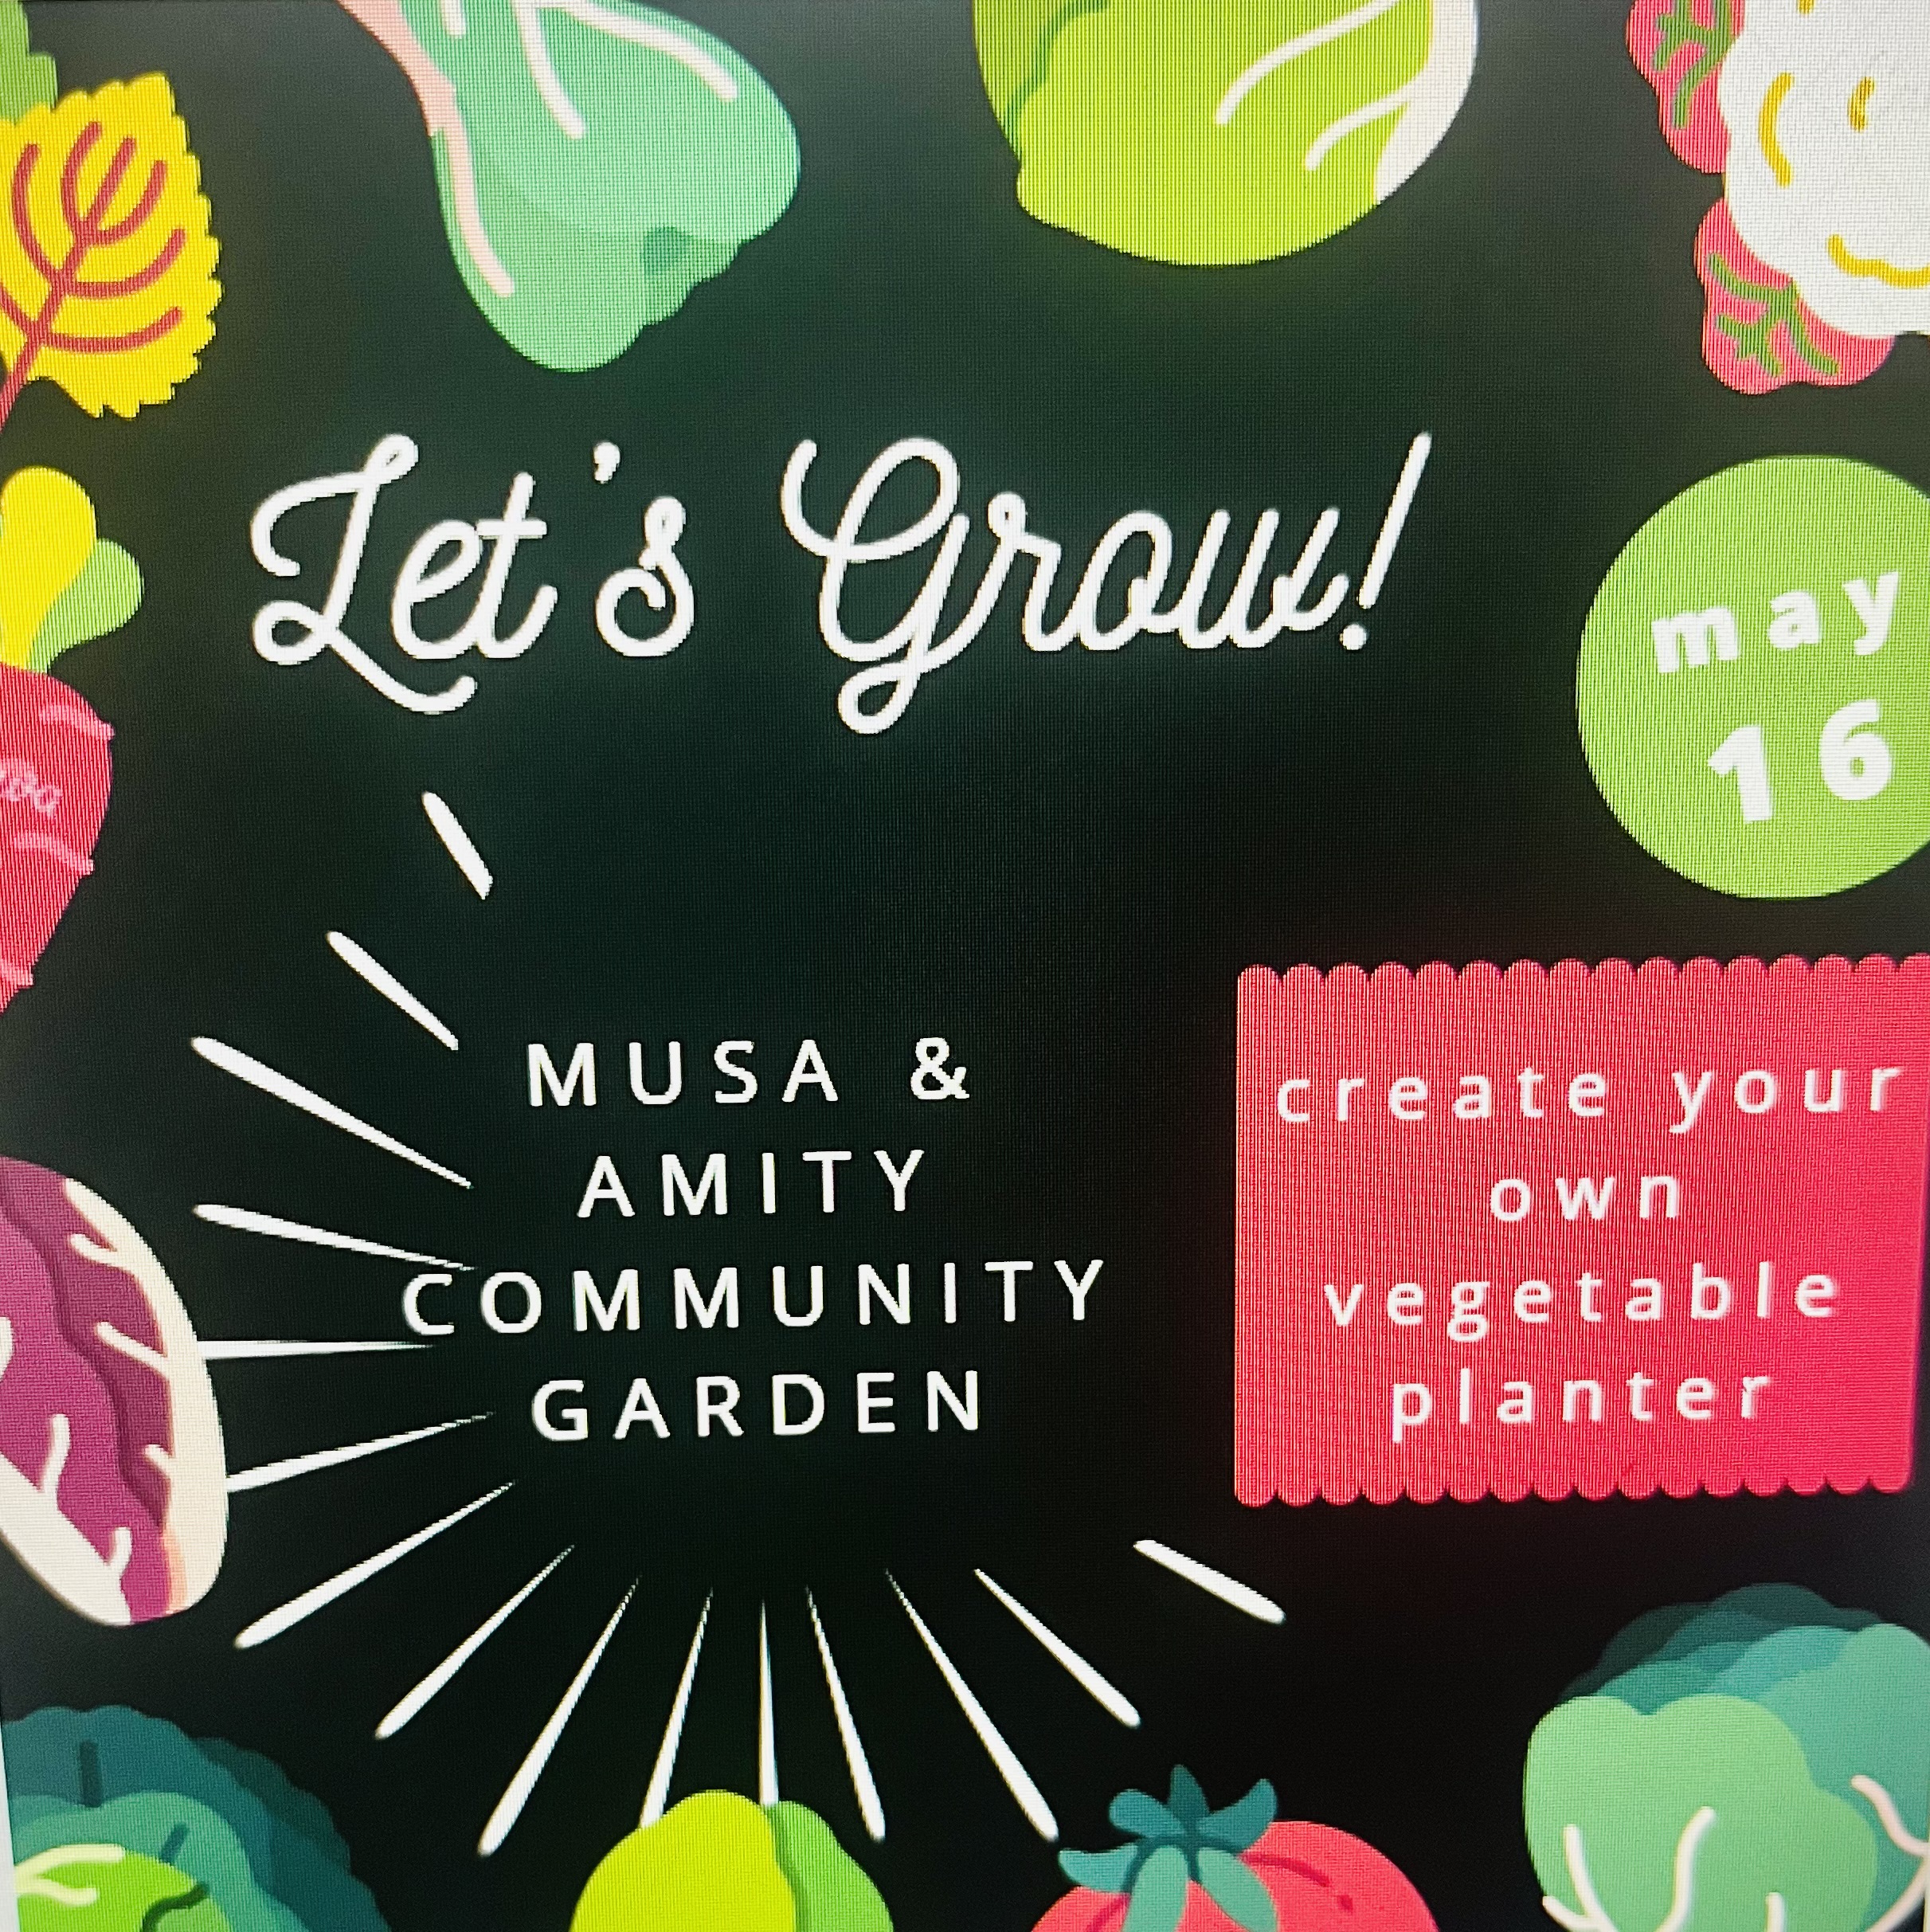 Image for Let’s Grow! Build your own Vegetable Planter!